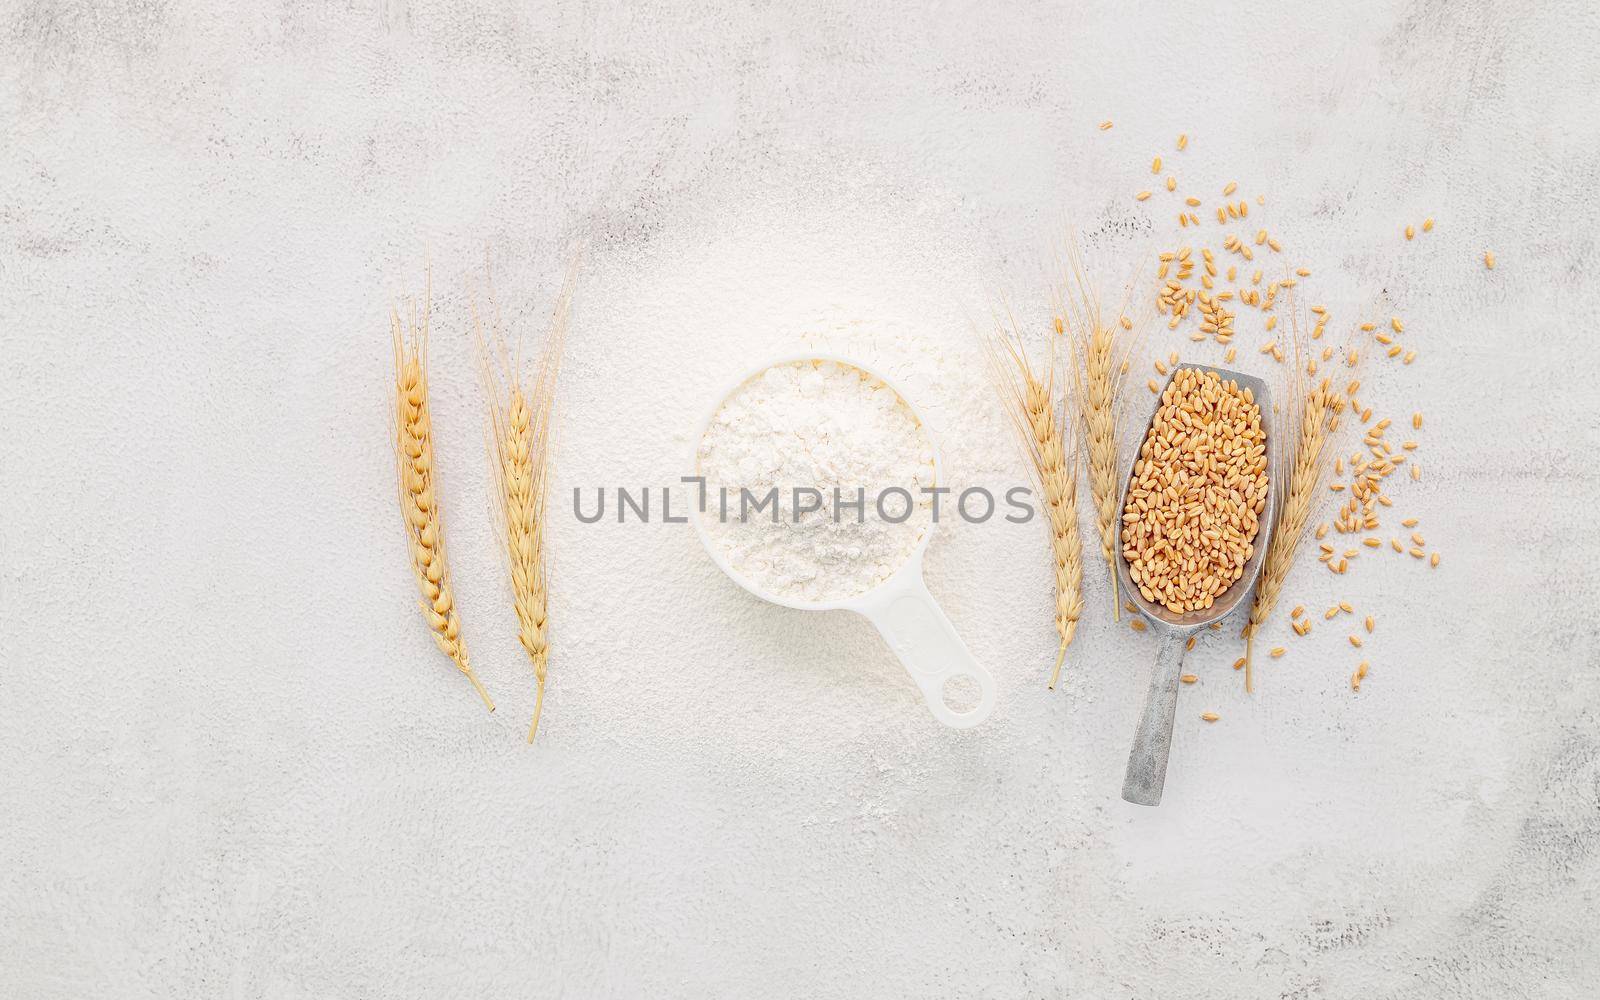 The ingredients for homemade pizza dough with wheat ears ,wheat flour and olive oil set up on white concrete background. top view and copy space.